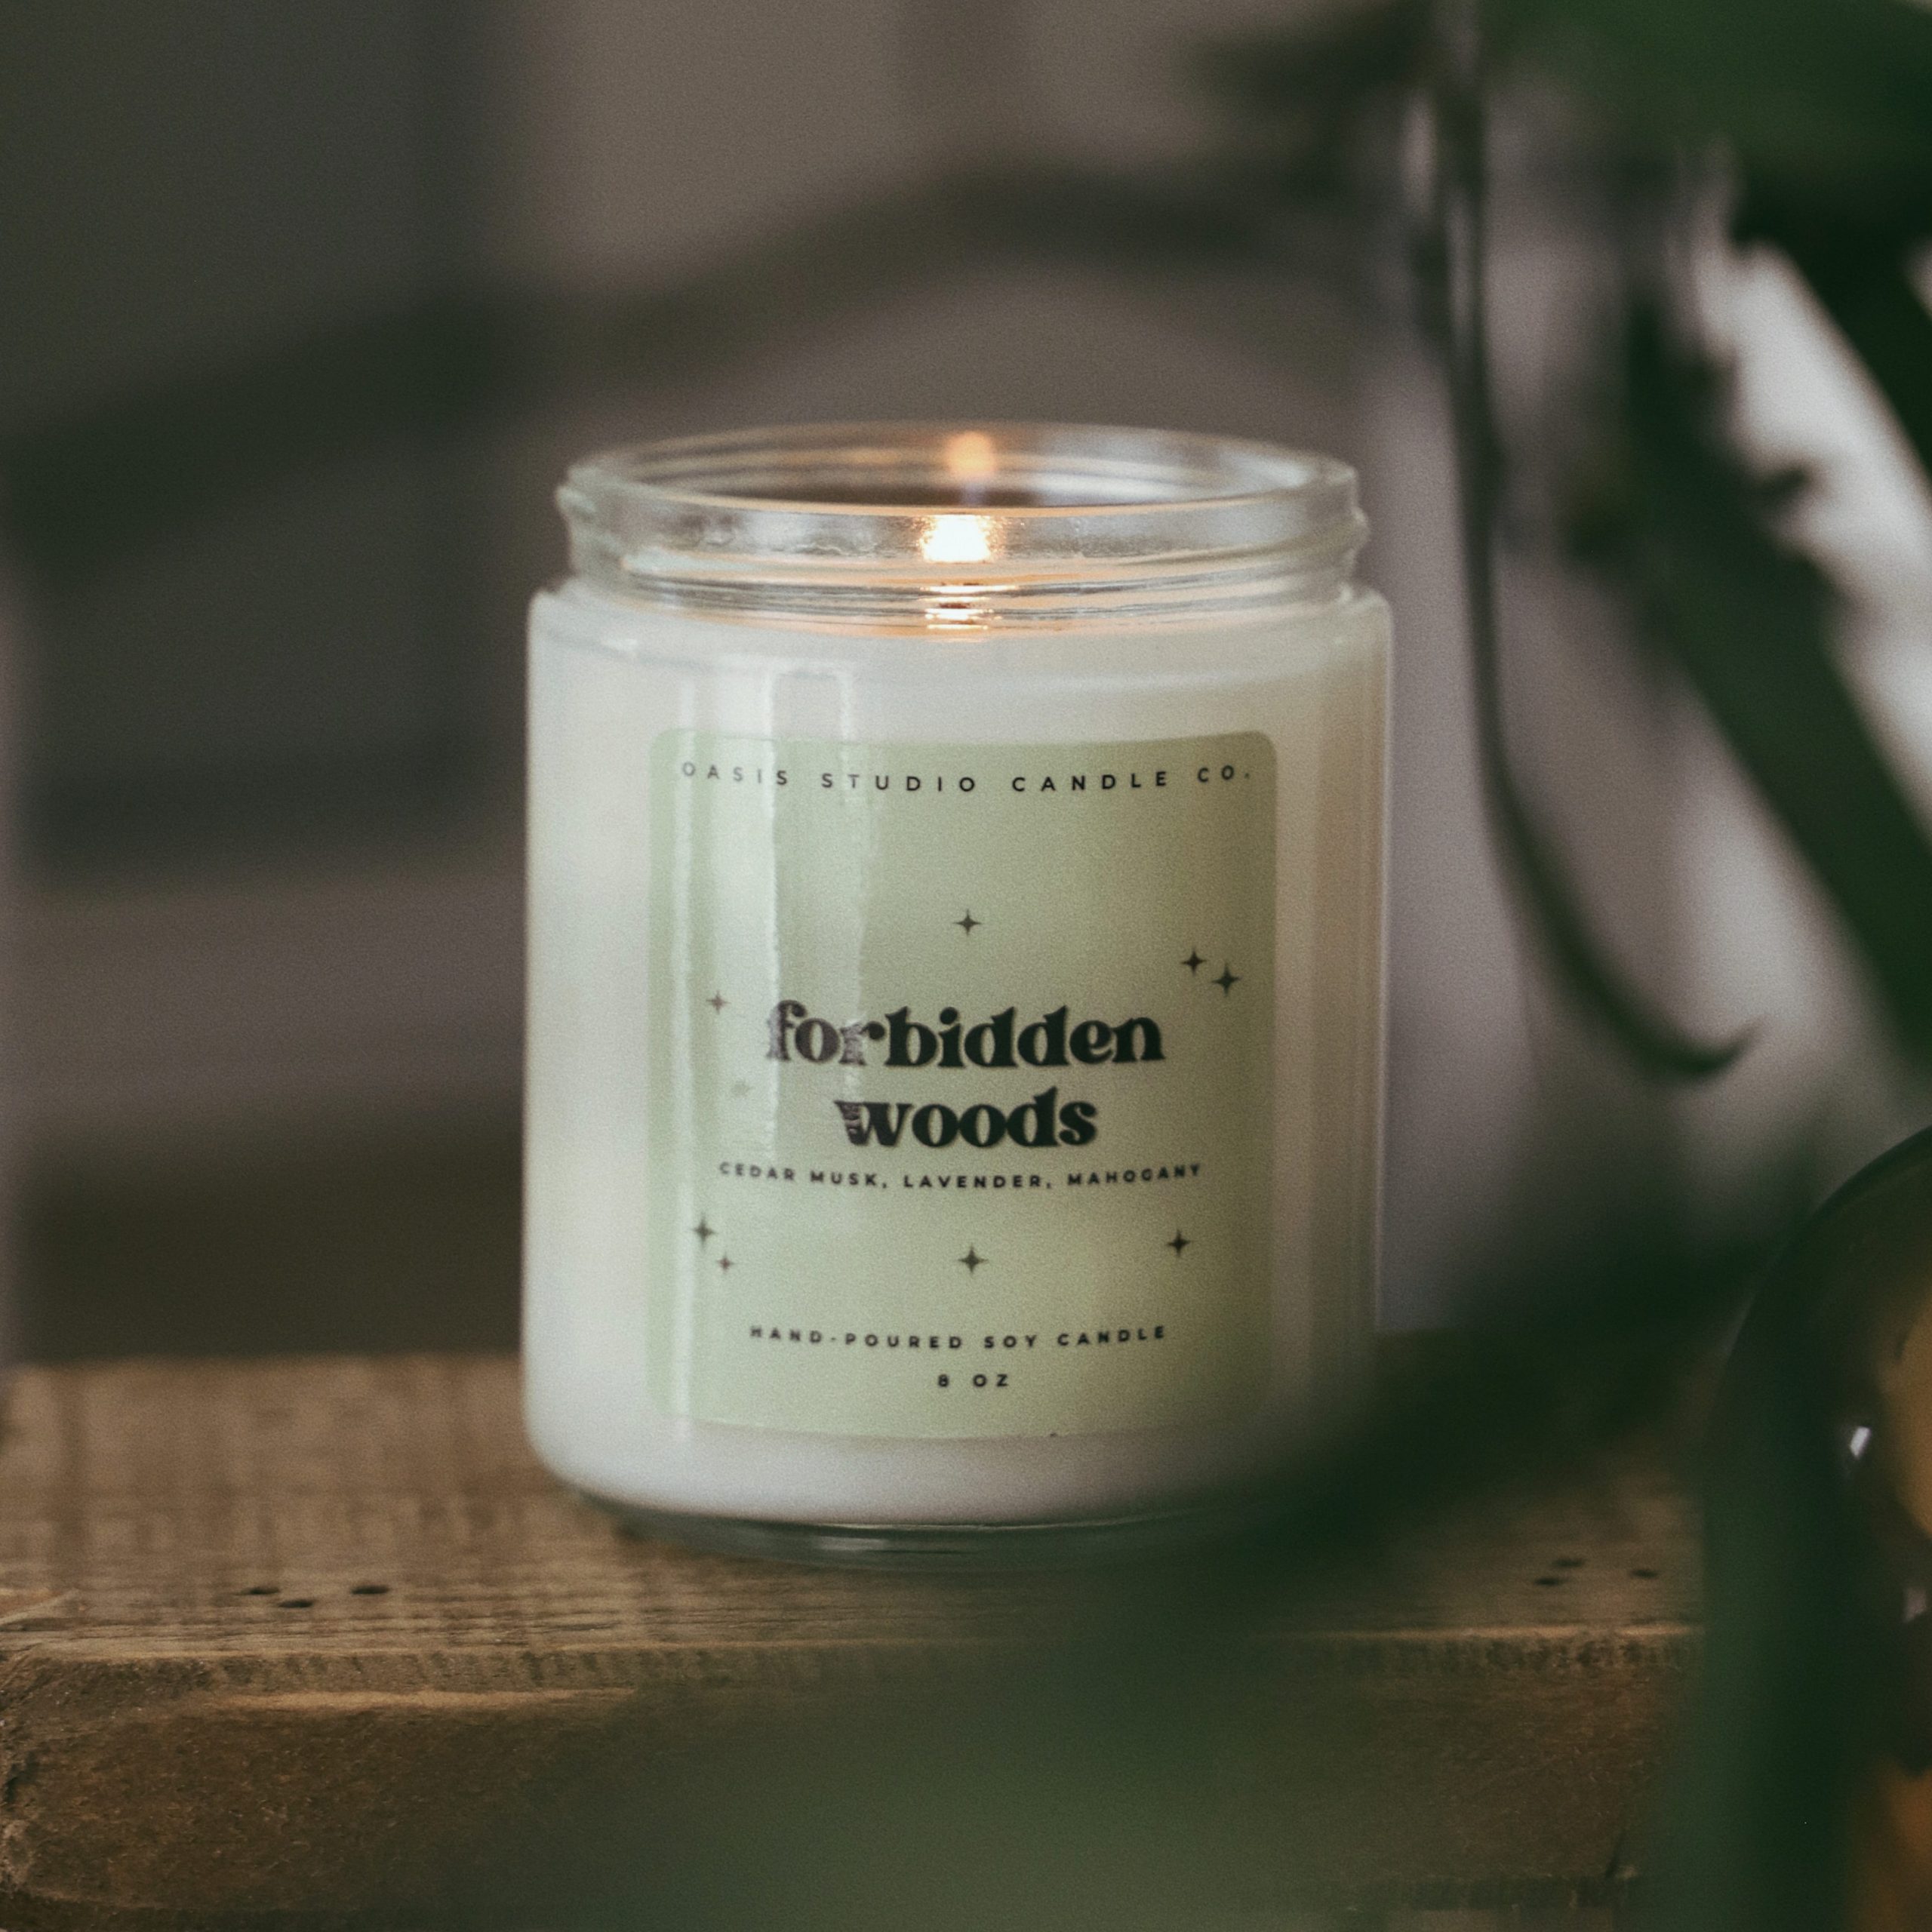 forbidden woods candle by oasis studio featured in vellabox